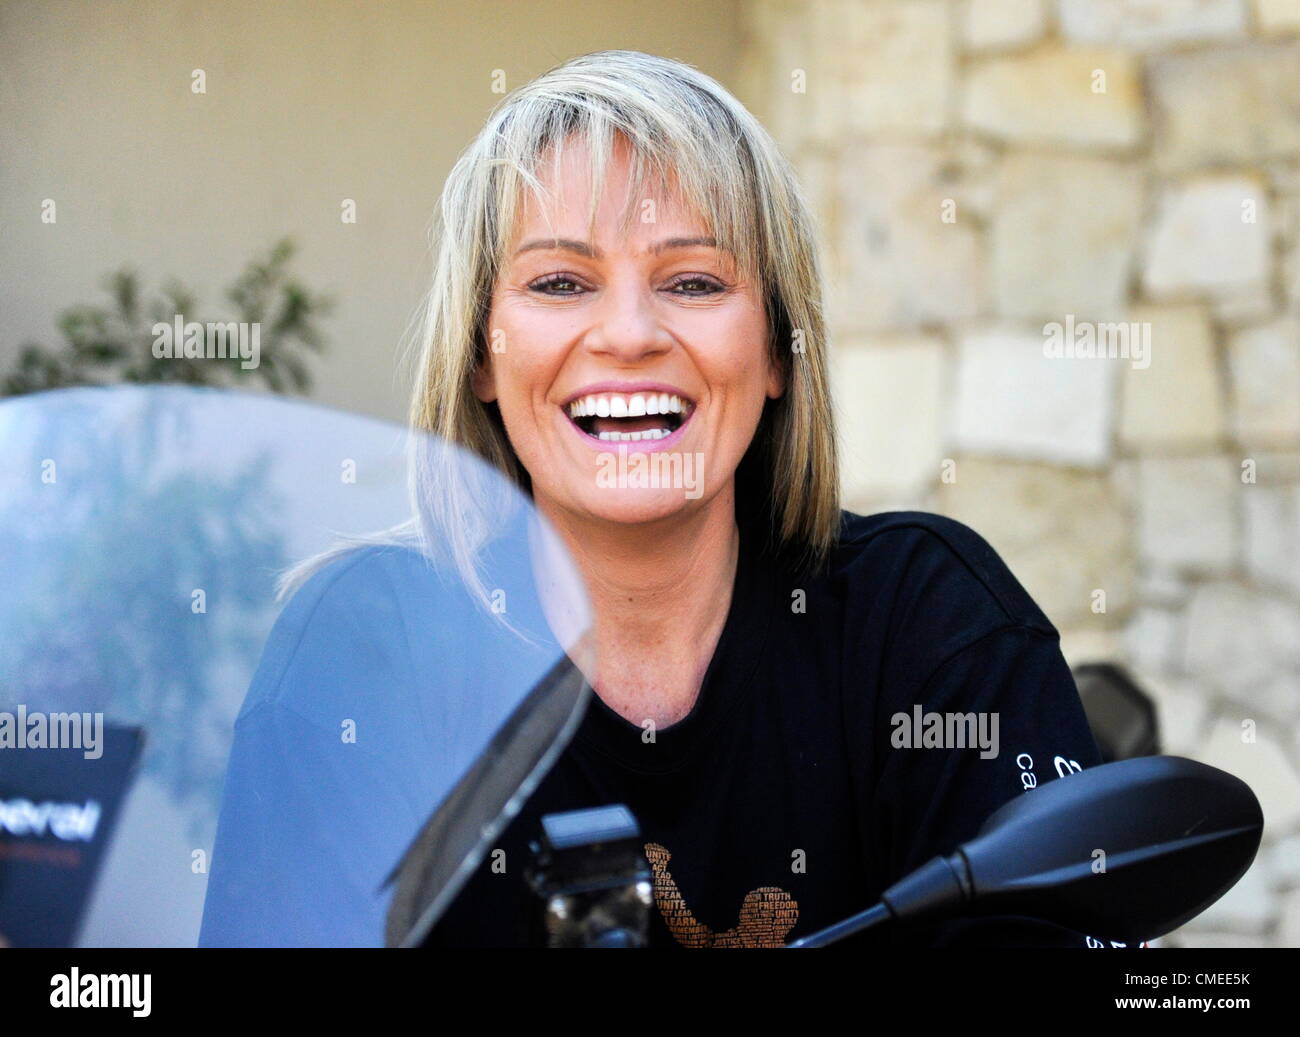 JOHANNESBURG, SOUTH AFRICA: Activist Zelda le Grange with her “baby” a grey silver and grey BMW 800SG motorbike during an interview on July 25, 2012 in Johannesburg, South Africa. She and some of South Africa’s popular personalities just returned from the third Biker 4 Mandela tour, which aims to raise money and help various charities countrywide. (Photo by Gallo Images / Foto24 / Loanna Hoffmann) Stock Photo